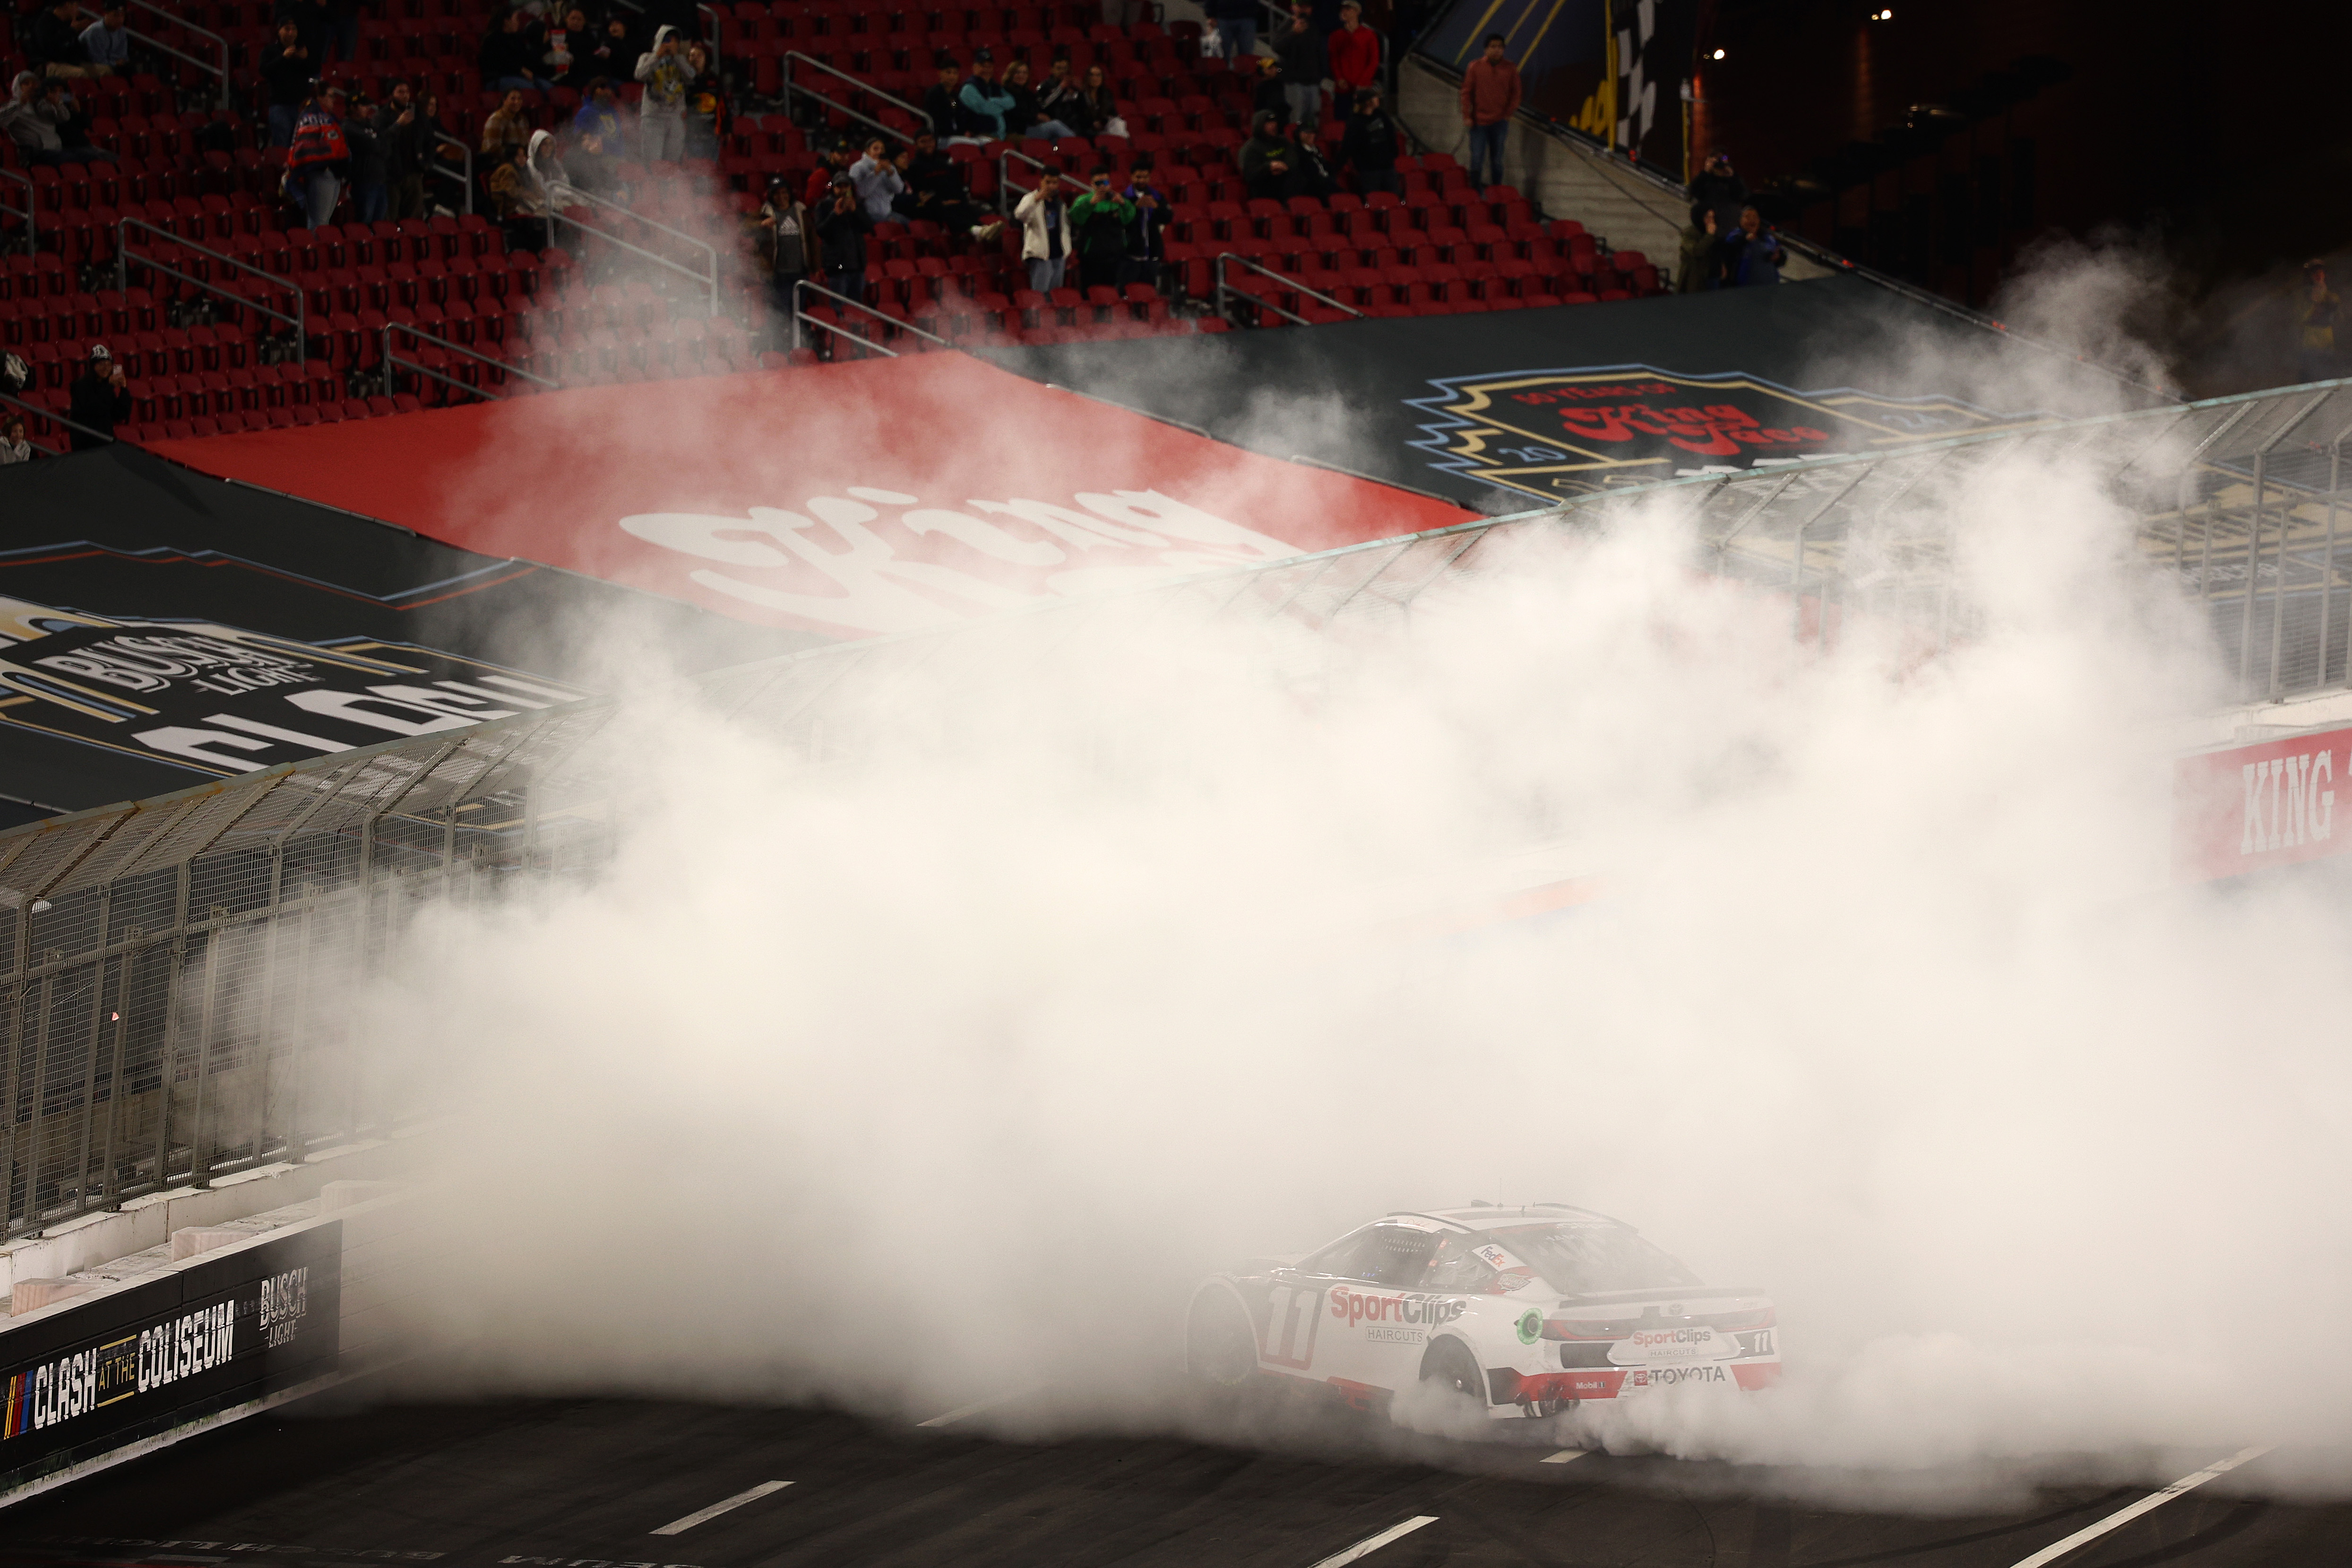 Denny Hamlin celebrates with a burnout after winning the NASCAR Cup Series Busch Light Clash at Los Angeles Memorial Coliseum on Saturday night. (Photo by Jared C. Tilton/Getty Images)